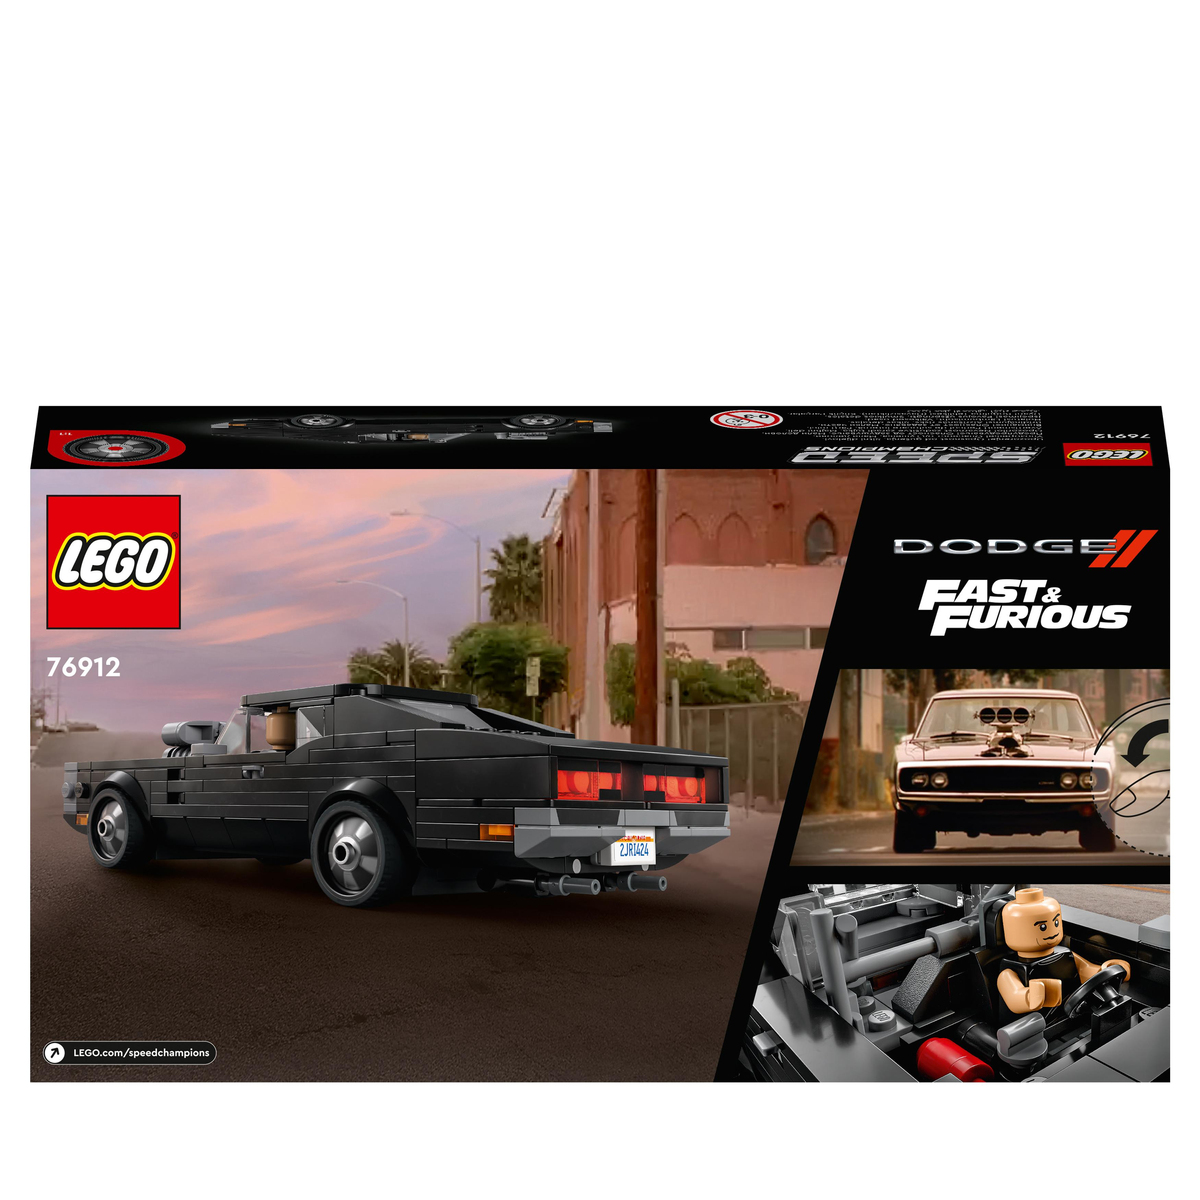 LEGO 76912 FAST & Speed 1970 Champions R/T LEGO CHARGER DODGE FURIOUS